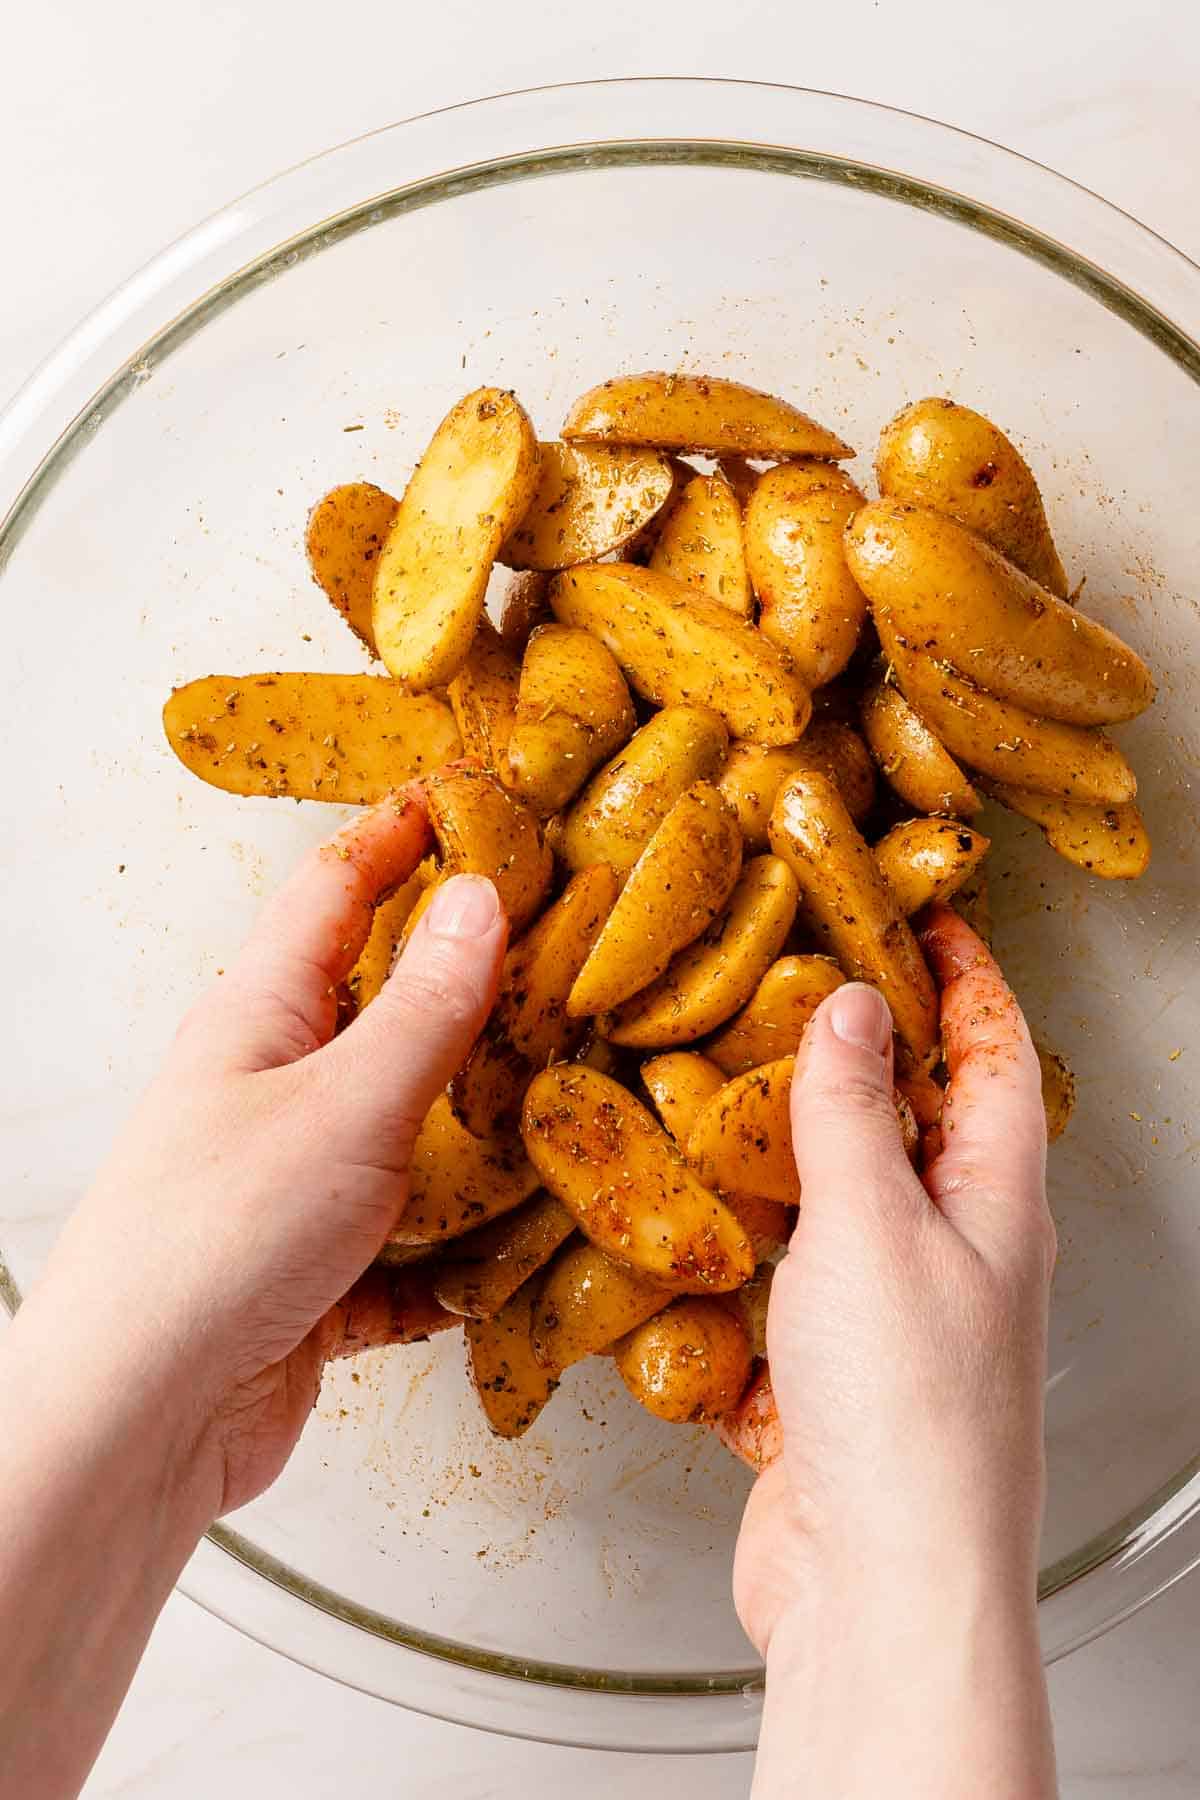 hands tossing potatoes with seasonings in bowl